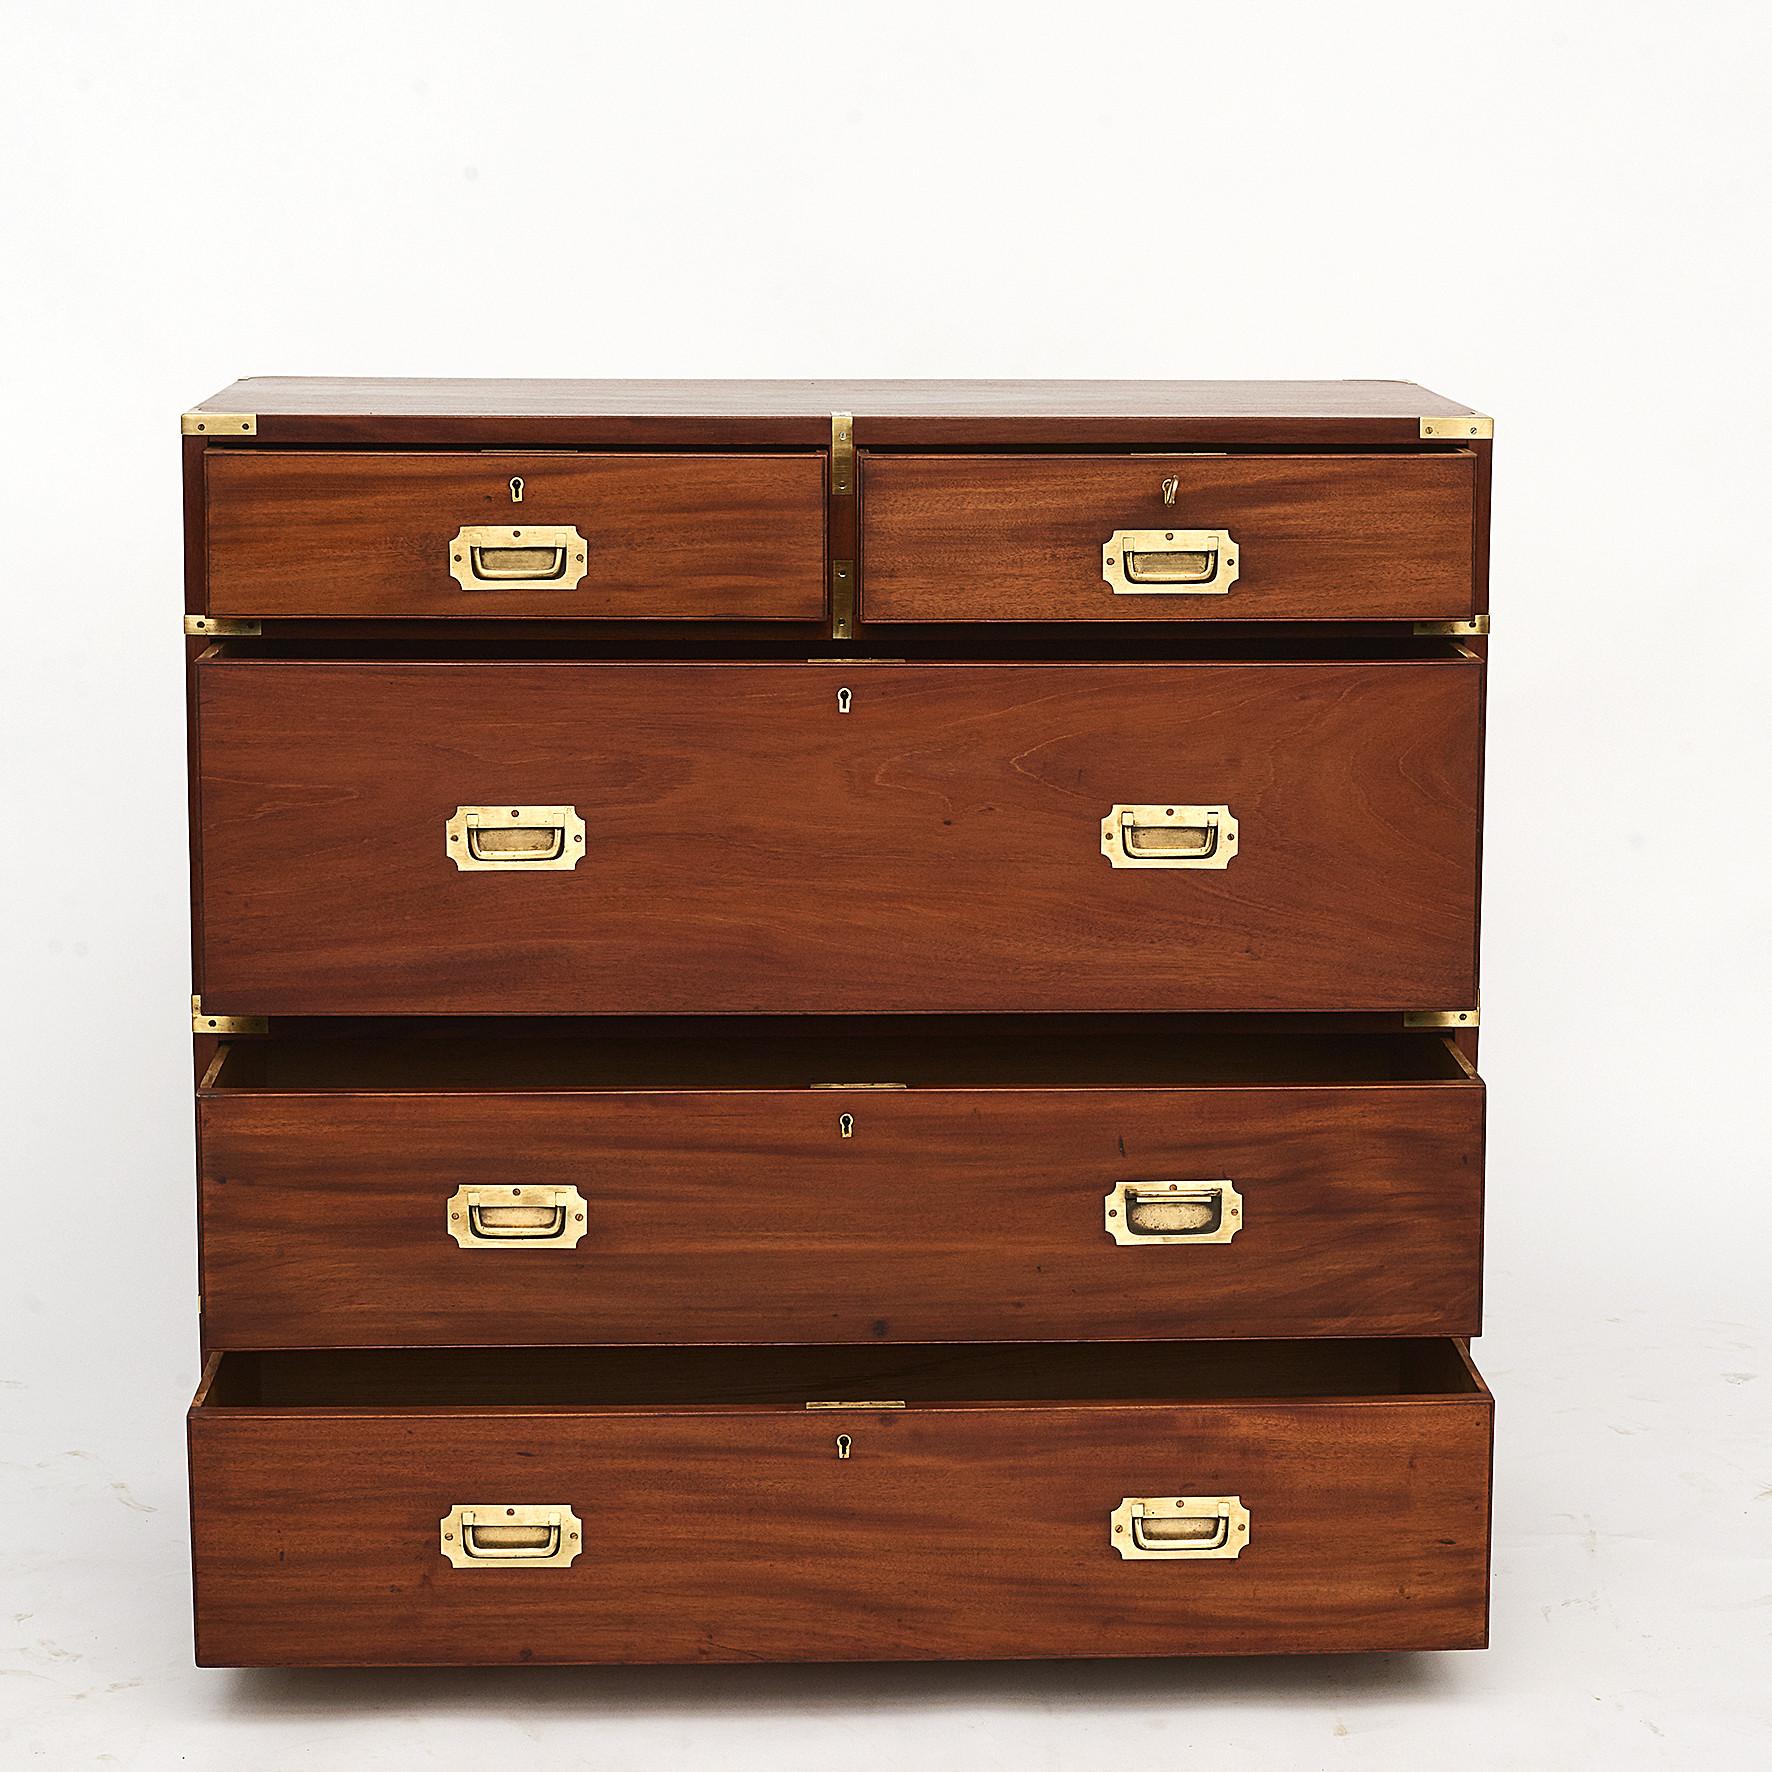 English Military Campaign chest of drawers in solid teak wood with original brass fittings. In two sections.
Carefully restored and in fine condition.
England late 19th century.